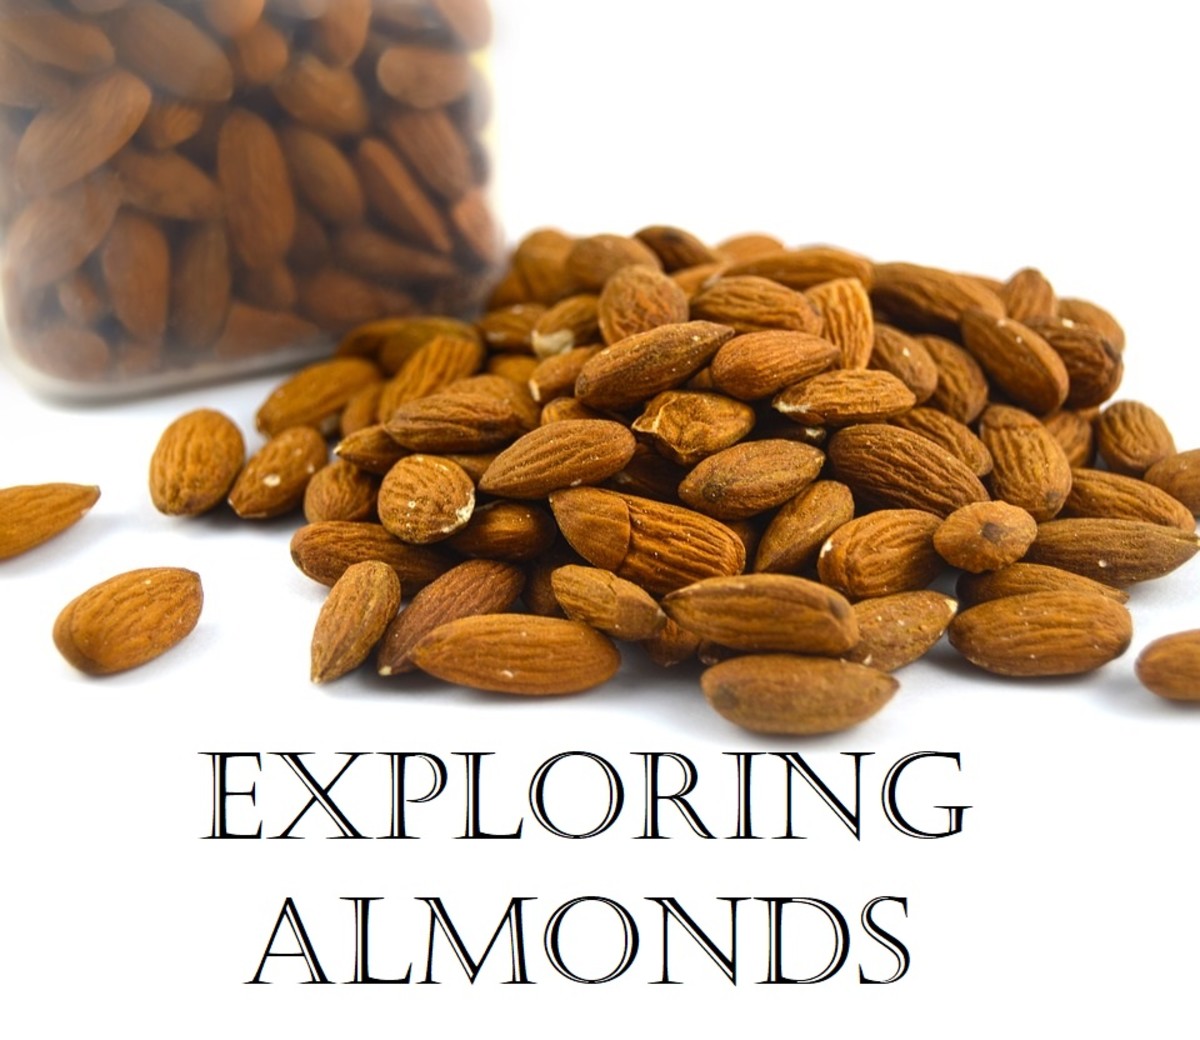 Almonds are great for snacking, cooking, and baking